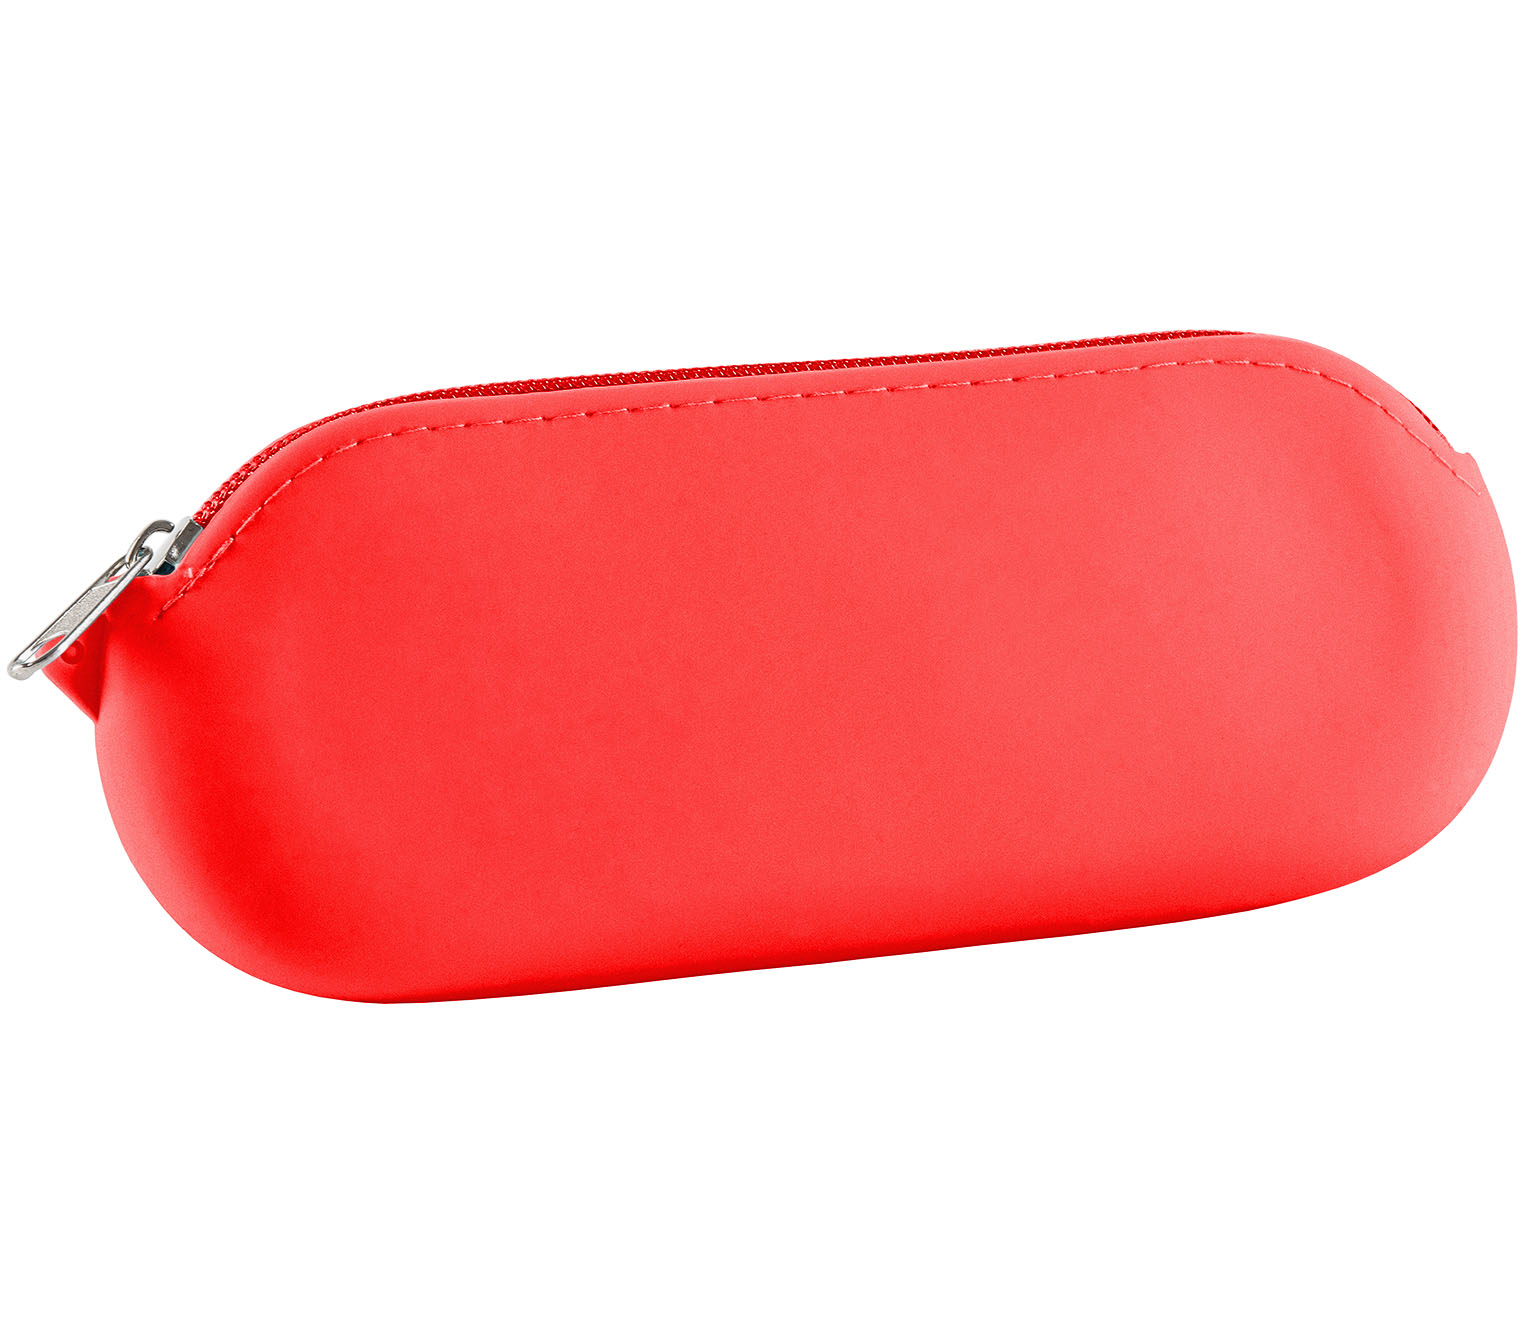 Main Image (Angle) - Buzz (Red) Glasses Cases Accessories